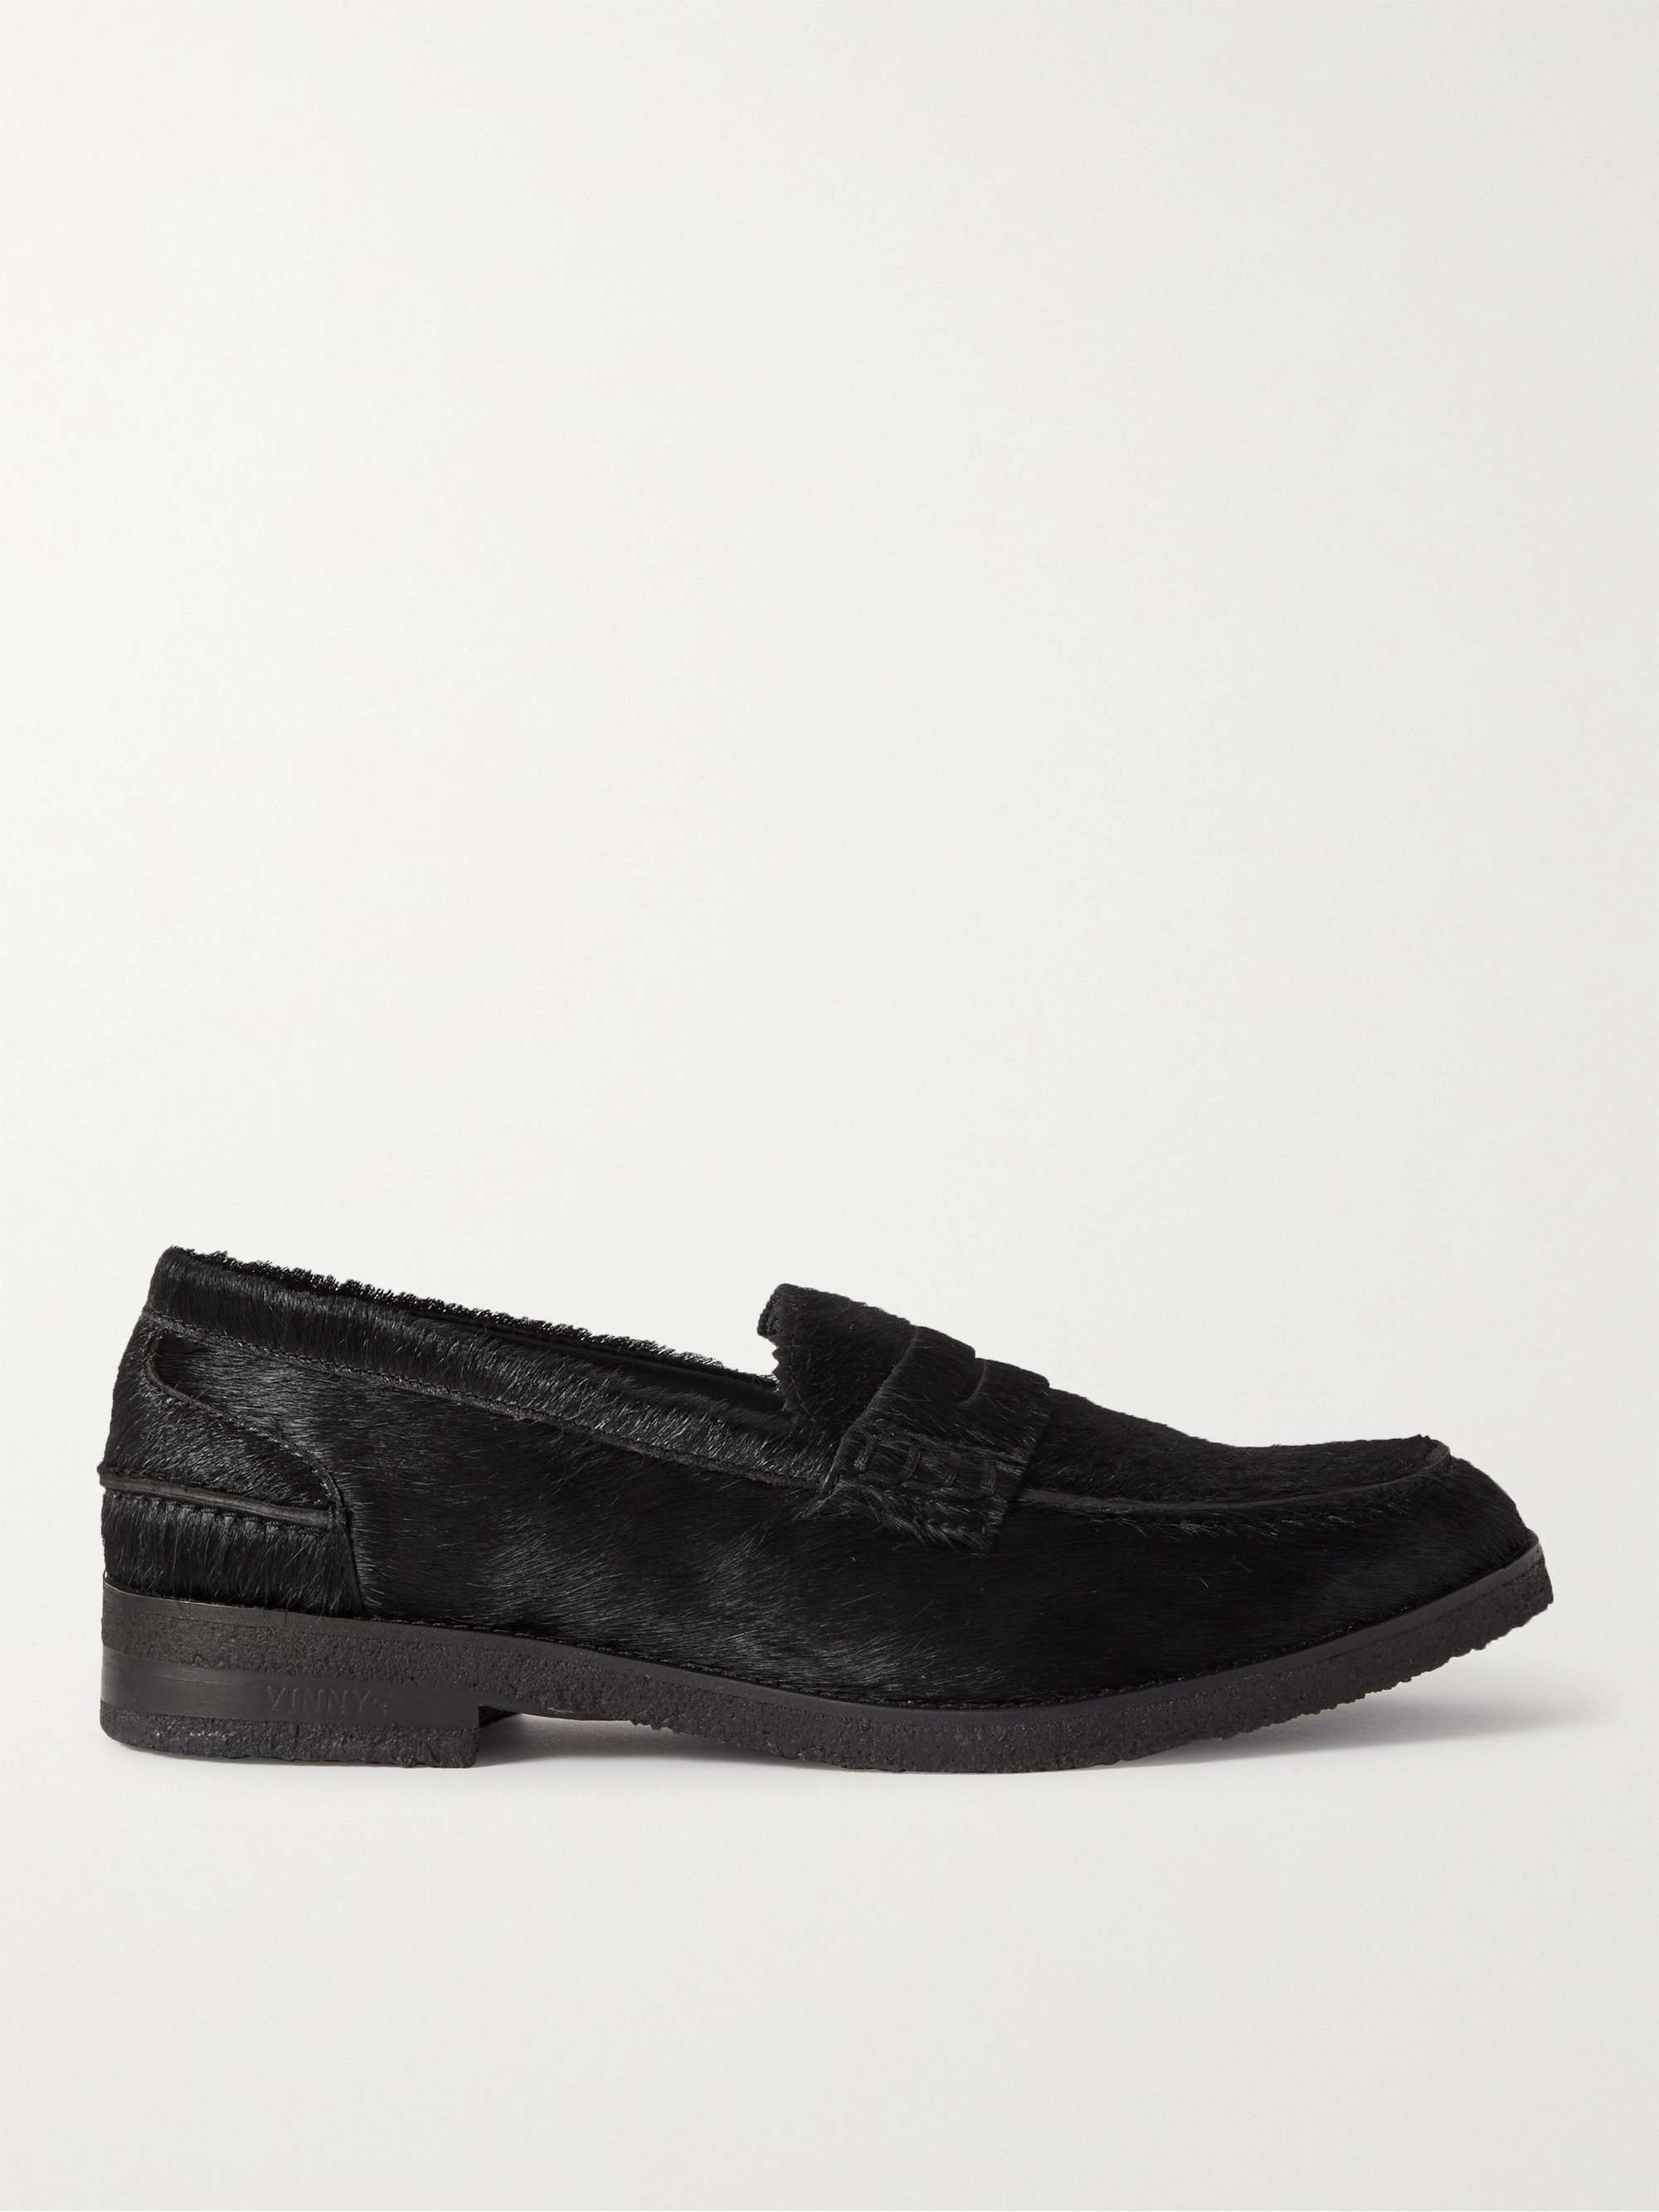 VINNY'S Paname Full-Grain Leather Penny Loafers